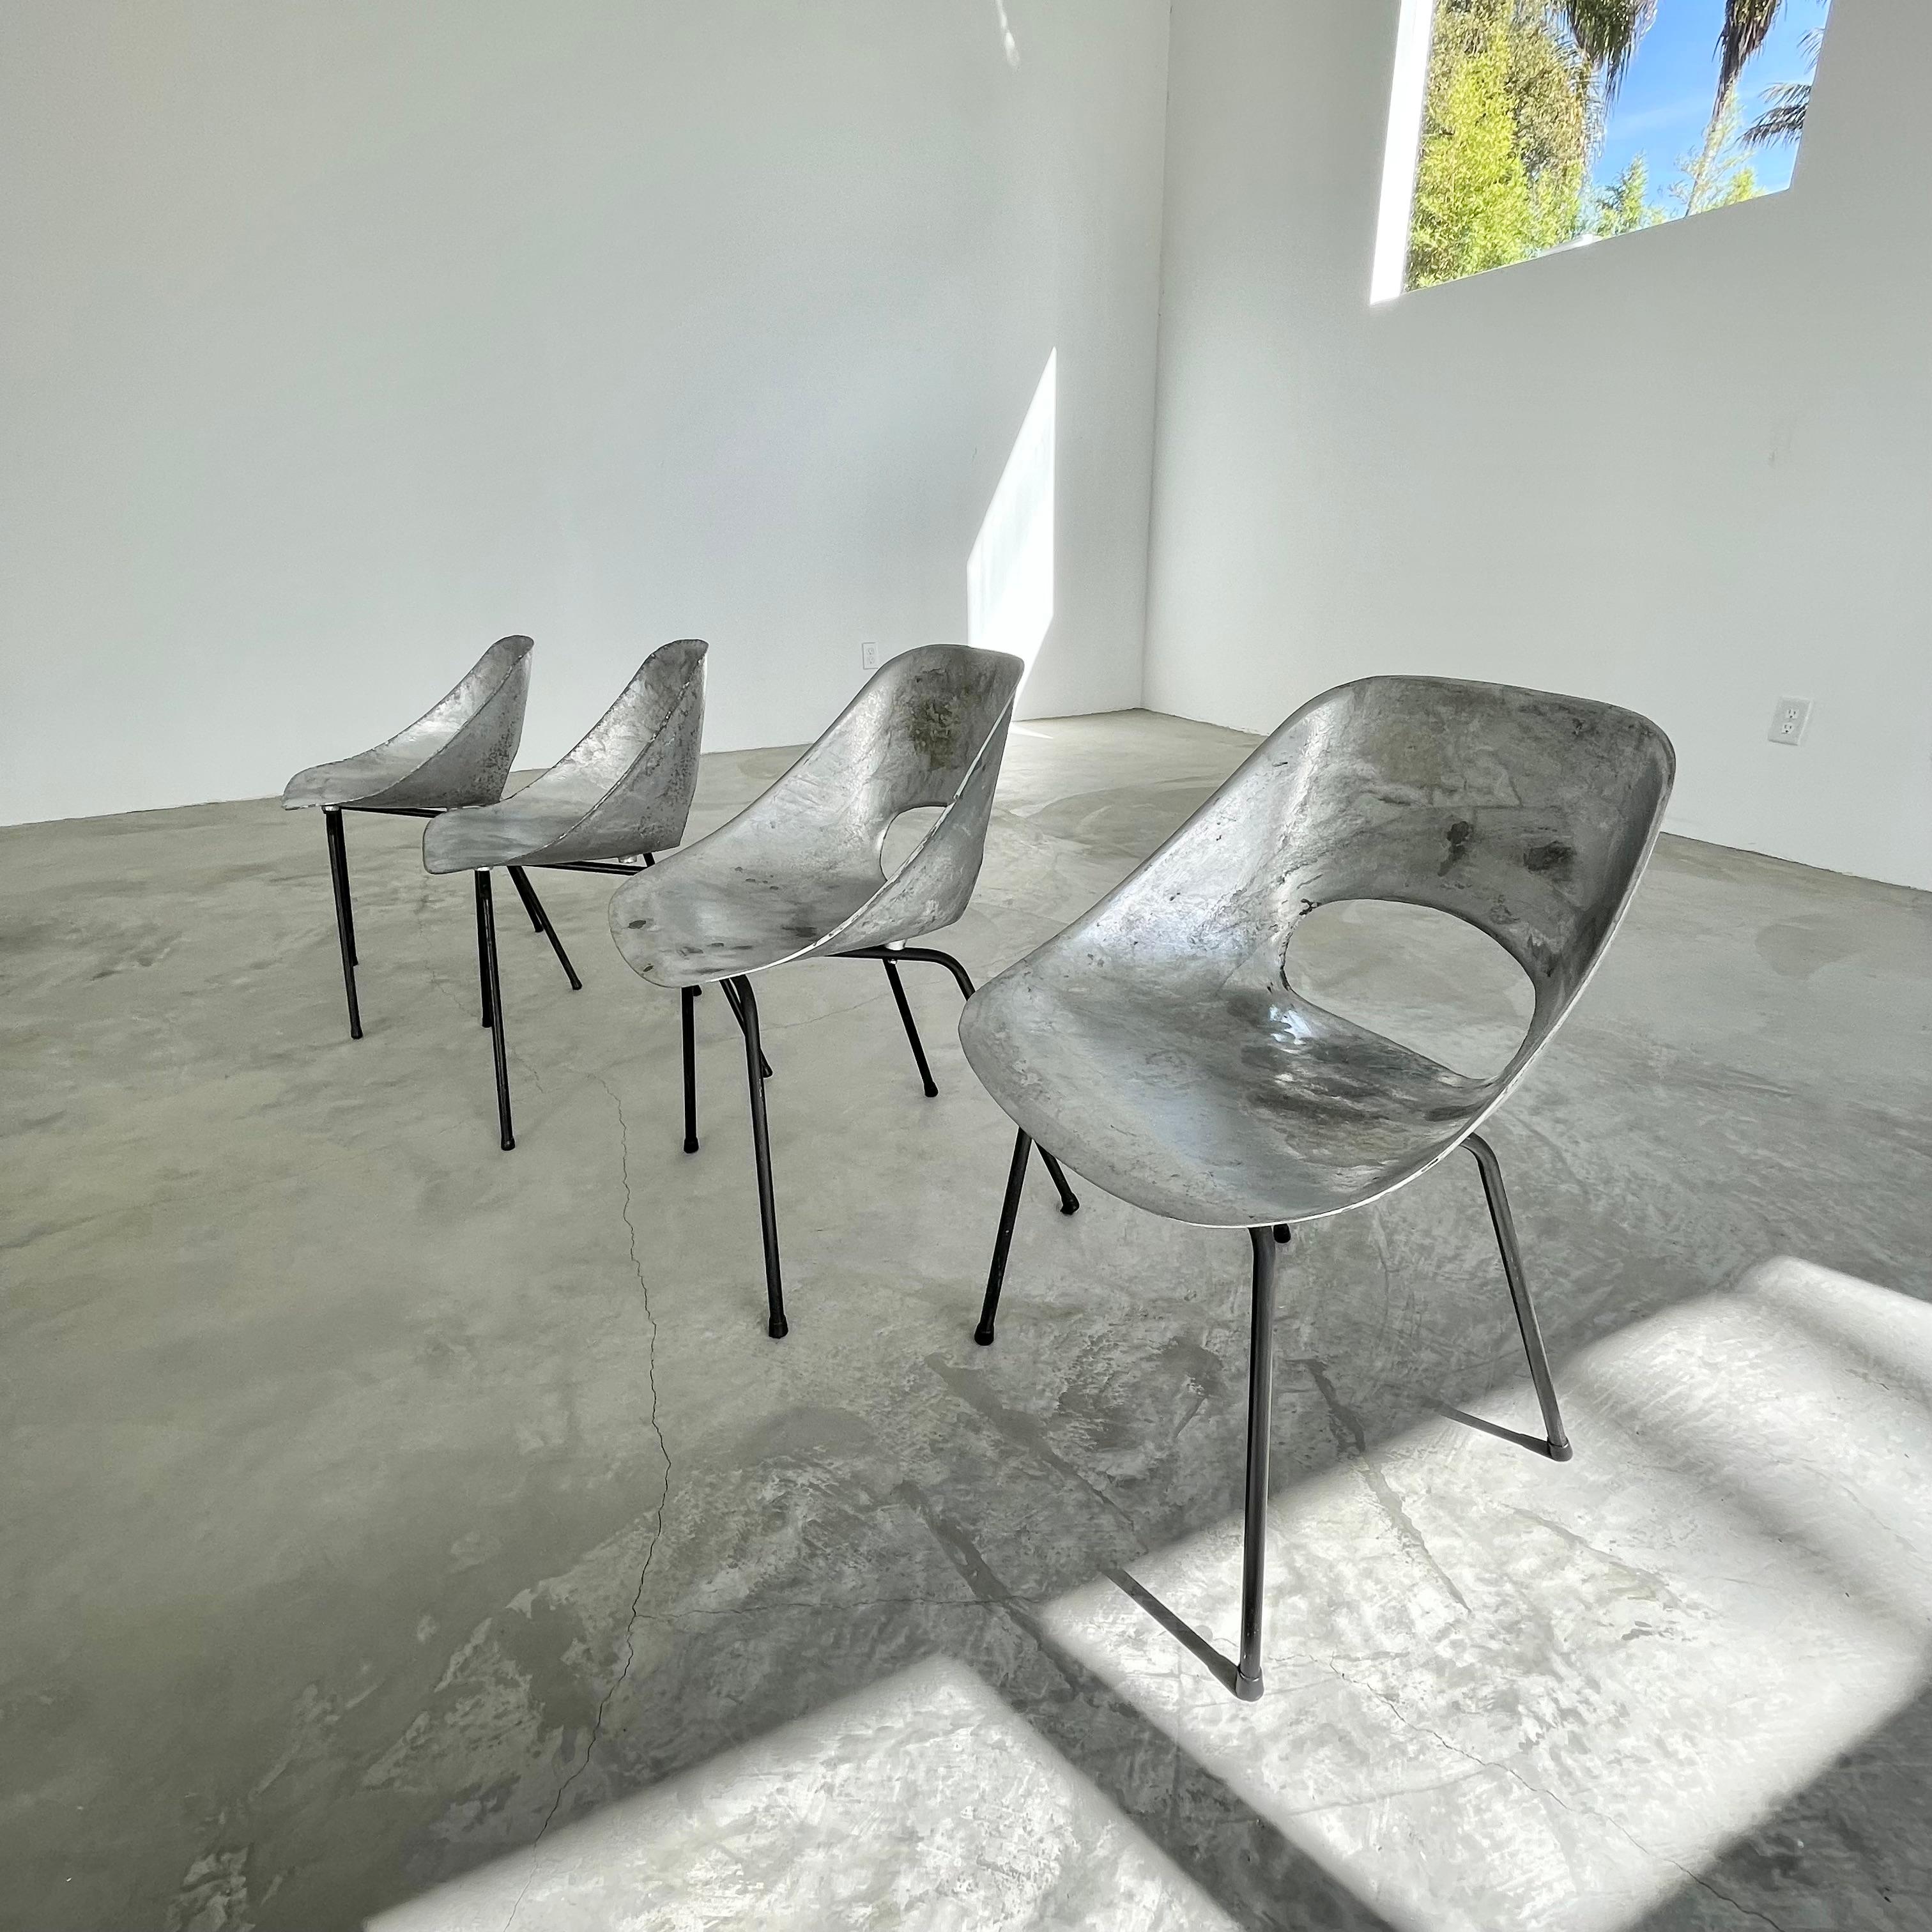 Gorgeous set of 4 aluminum chairs by Pierre Guariche. Cast aluminum frame sits on four iron legs. Great vintage condition and beautifully minimal design. Extremely rare. The non conventional beauty of these chairs makes them a great standalone